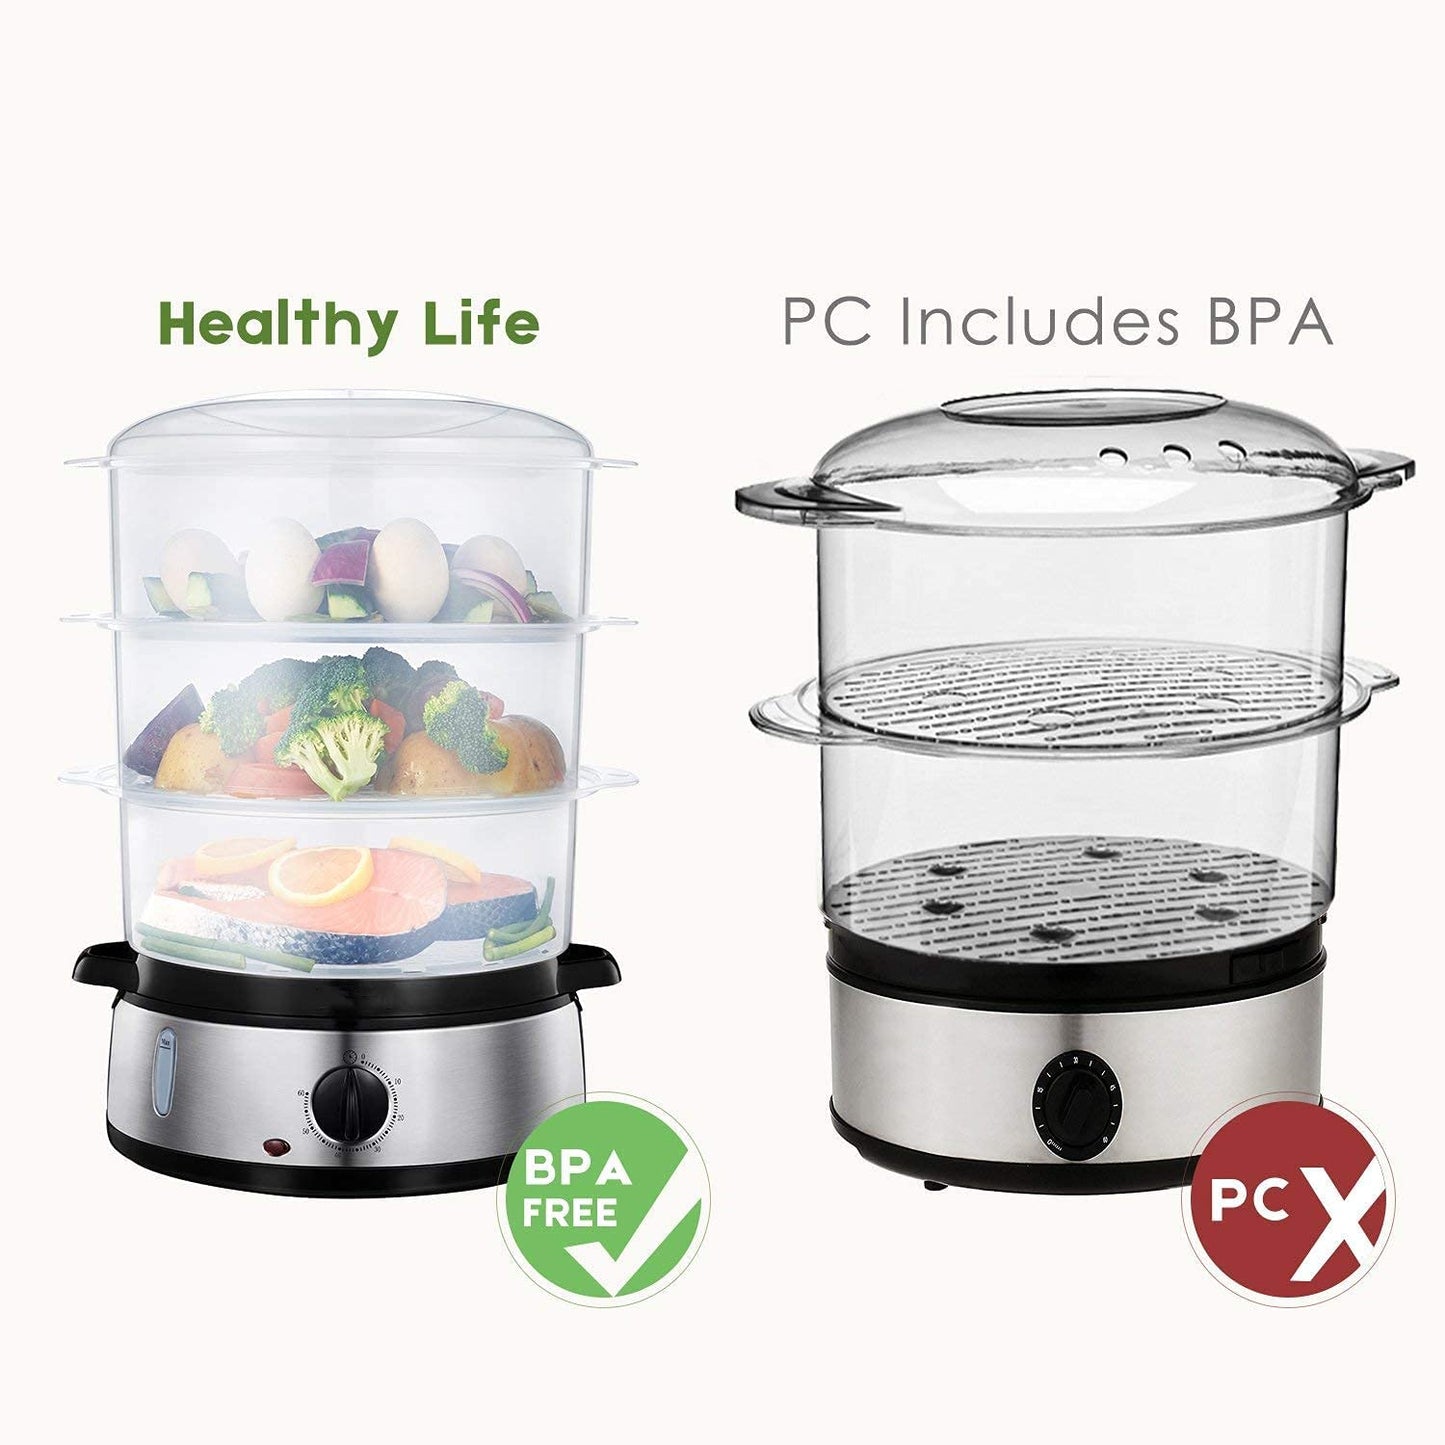 AICOK Electric Food Vegetable Steamer With 3-tier Stackable BPA-free Rice Bowl Makes Cooking Safe Elite Gourmet